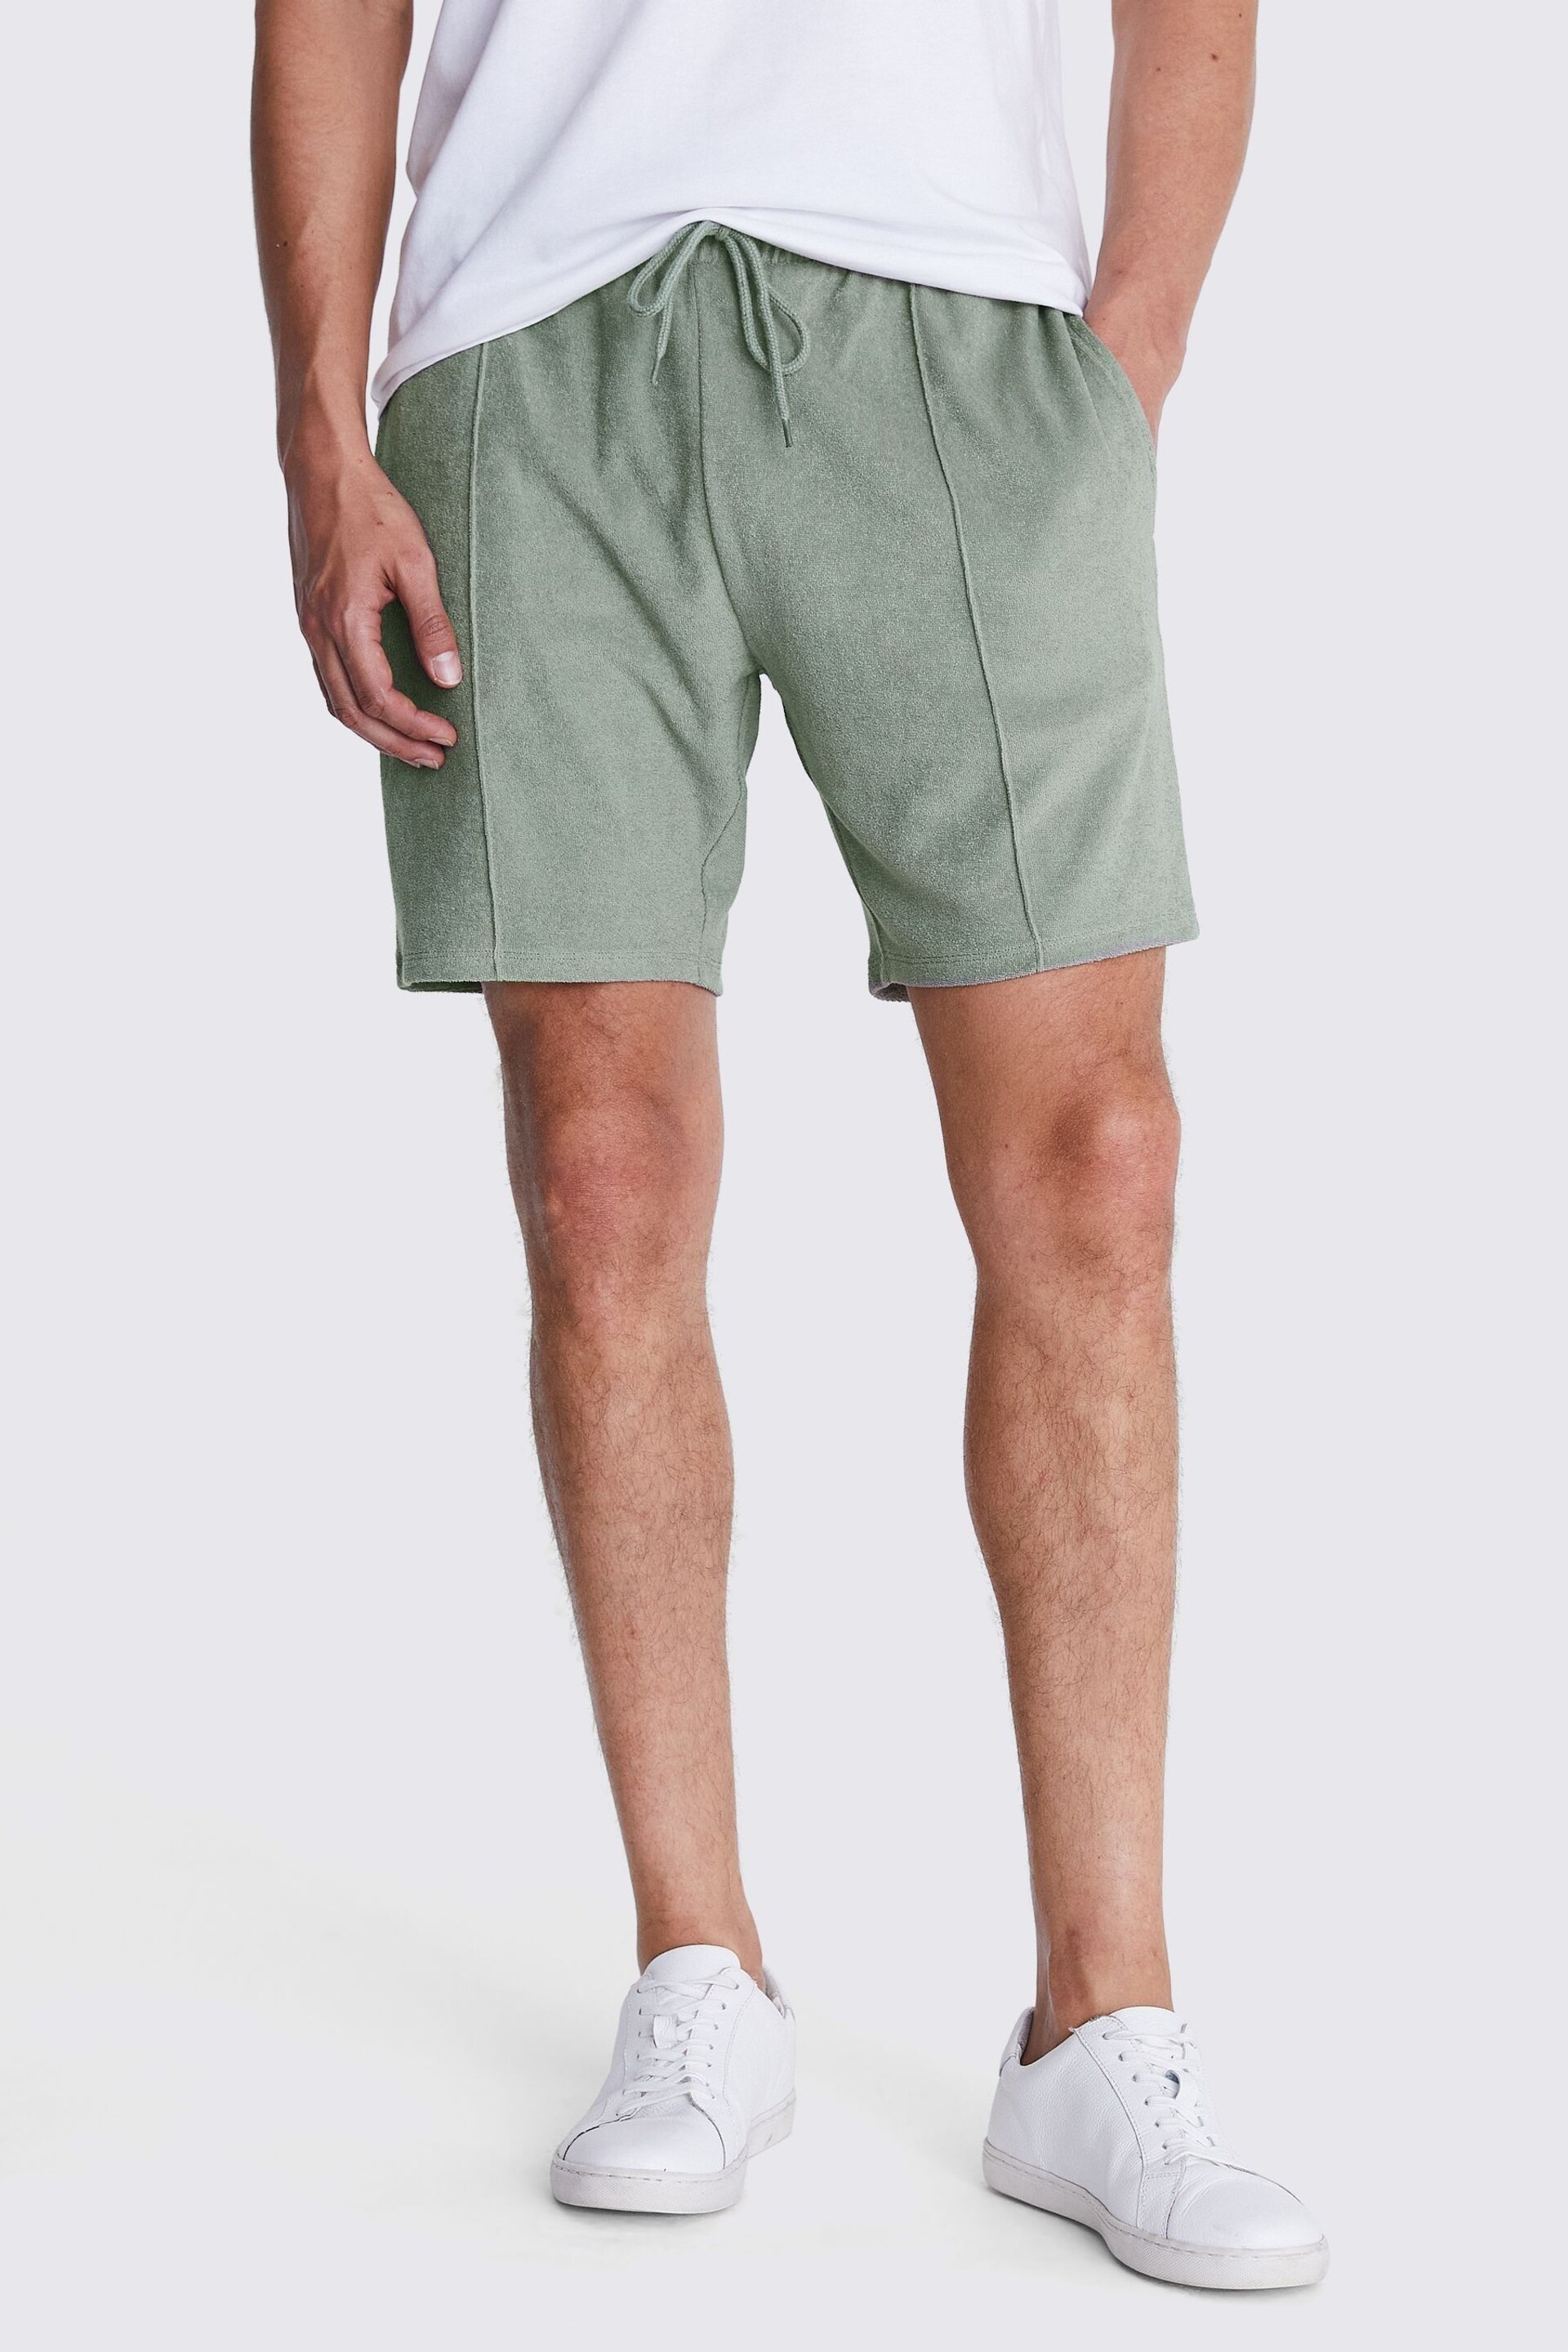 MOSS Green Terry Towelling Shorts - Image 1 of 3